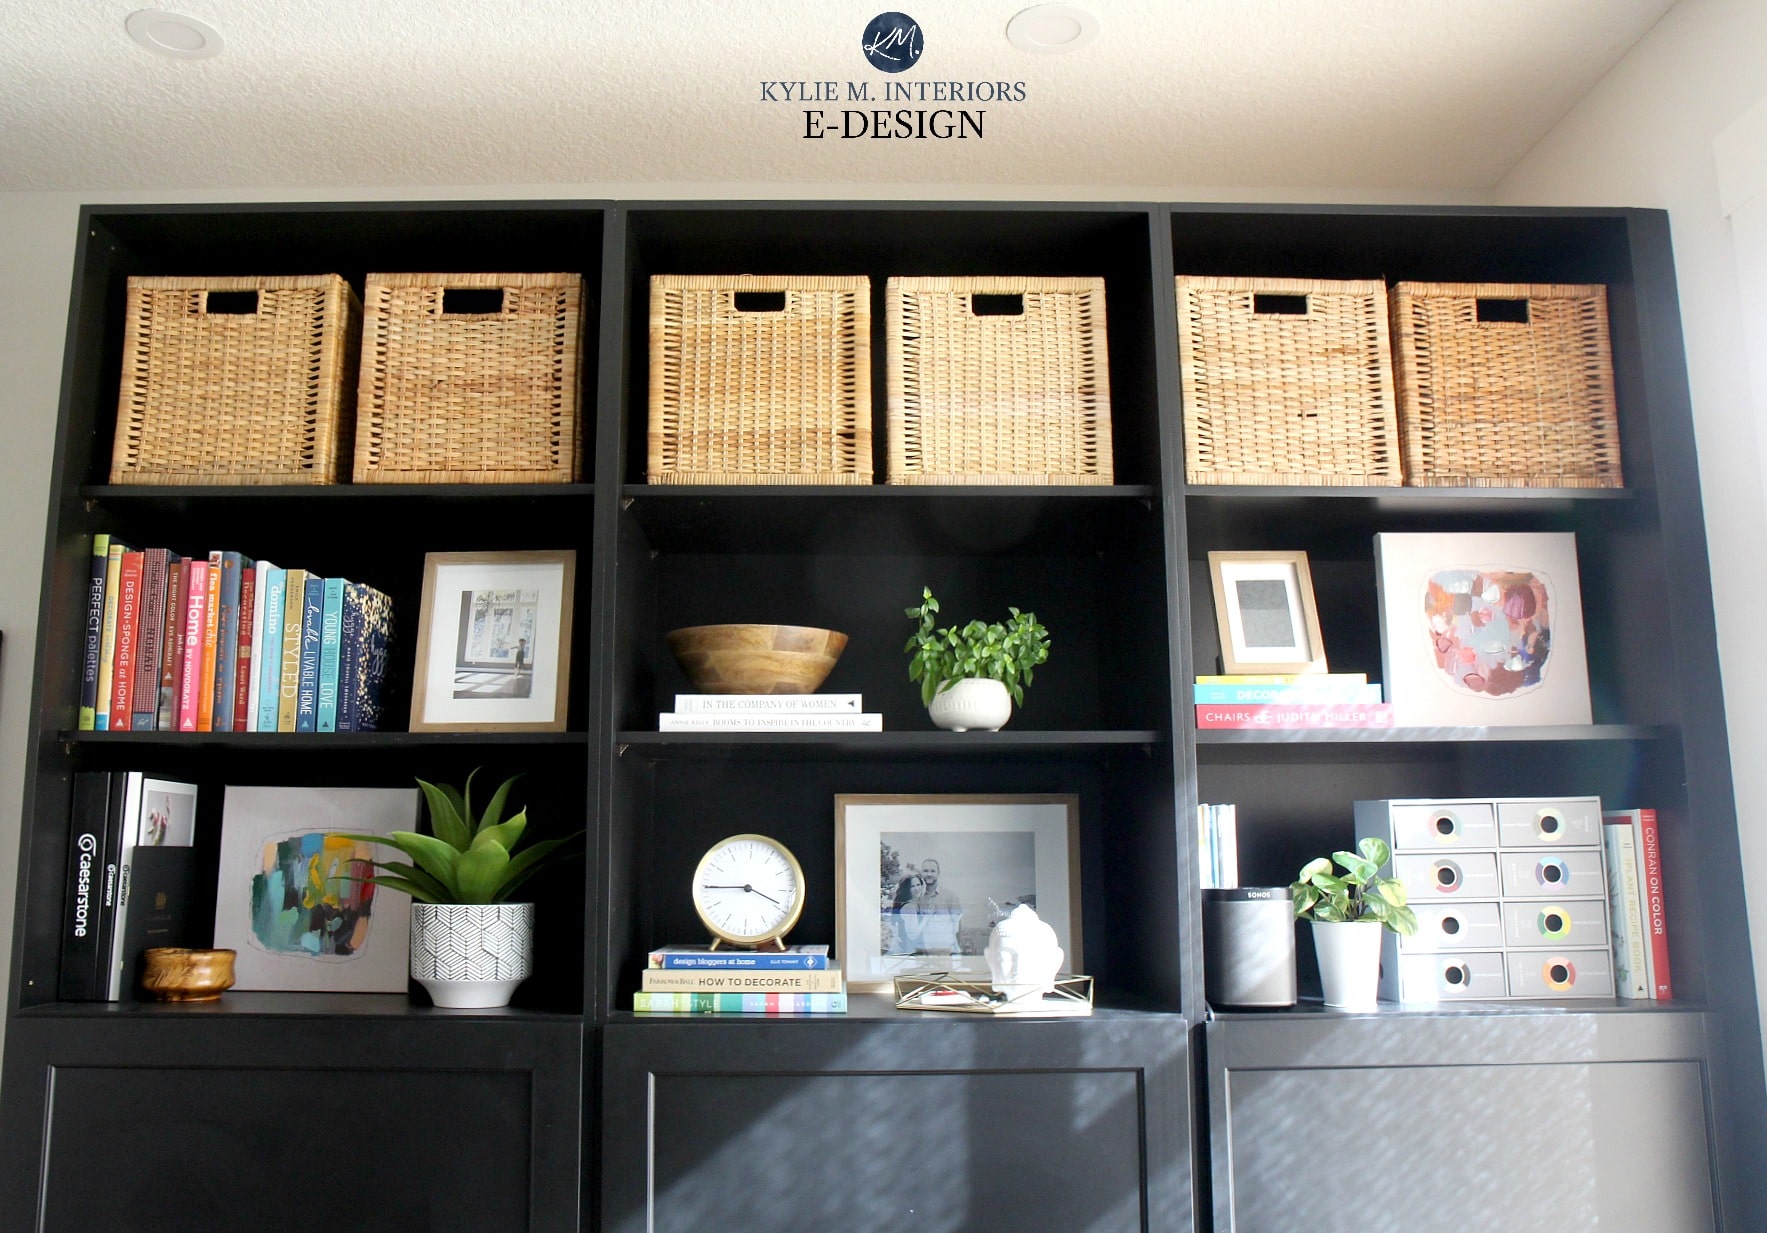 How to decorate a bookcase, bookshelf or built in. Black painted built in with home decor, books and frames. Kylie M Interiors Edesign, diy decorating and design blog